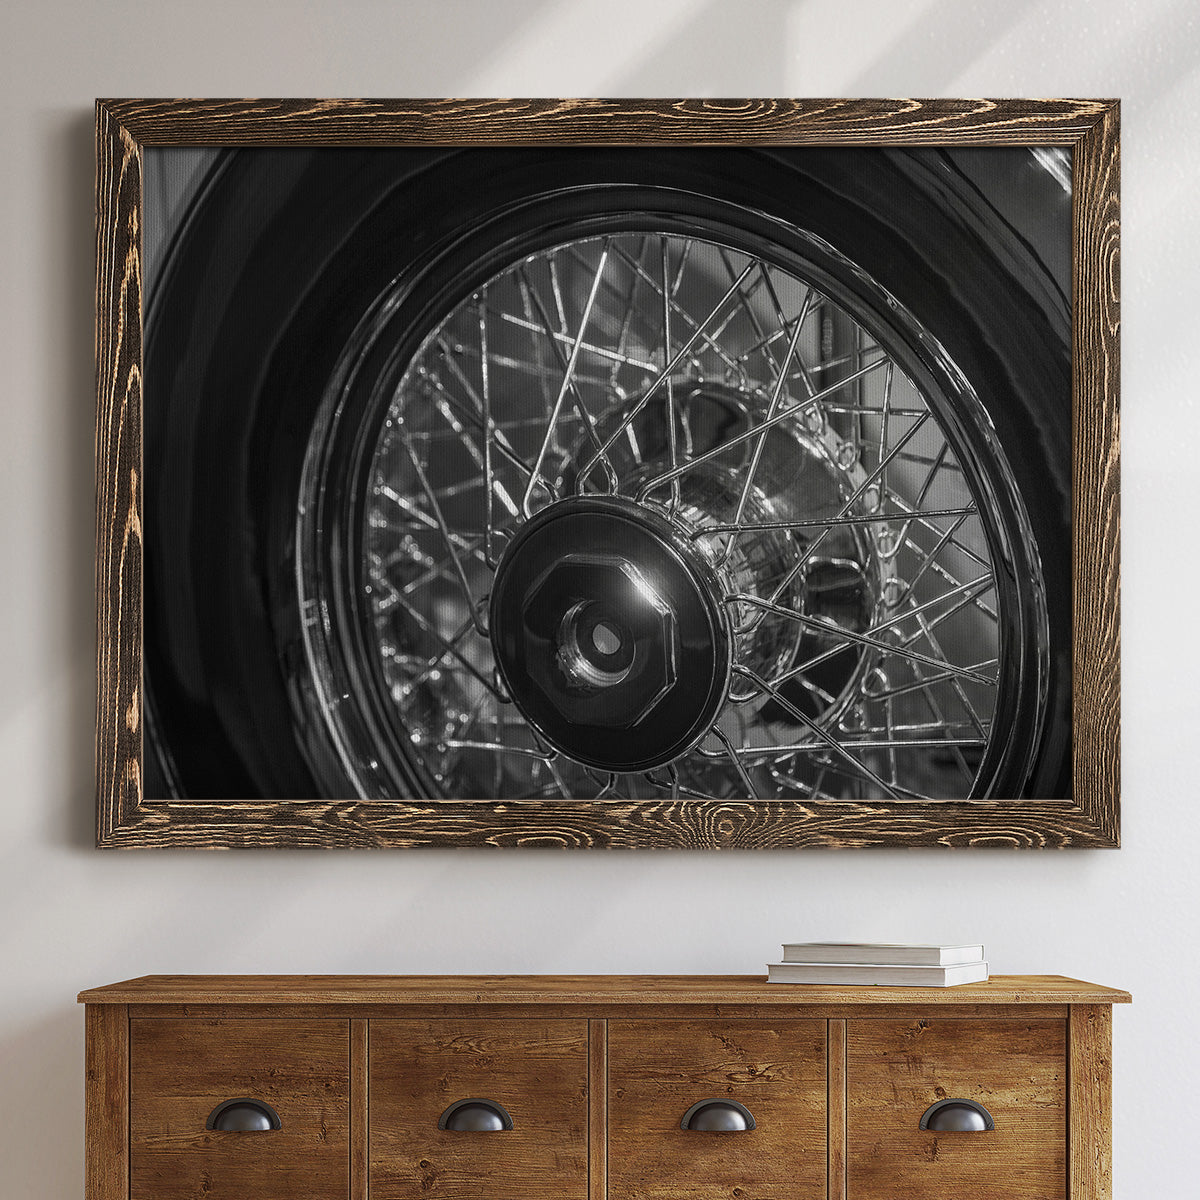 Vroom I-Premium Framed Canvas - Ready to Hang